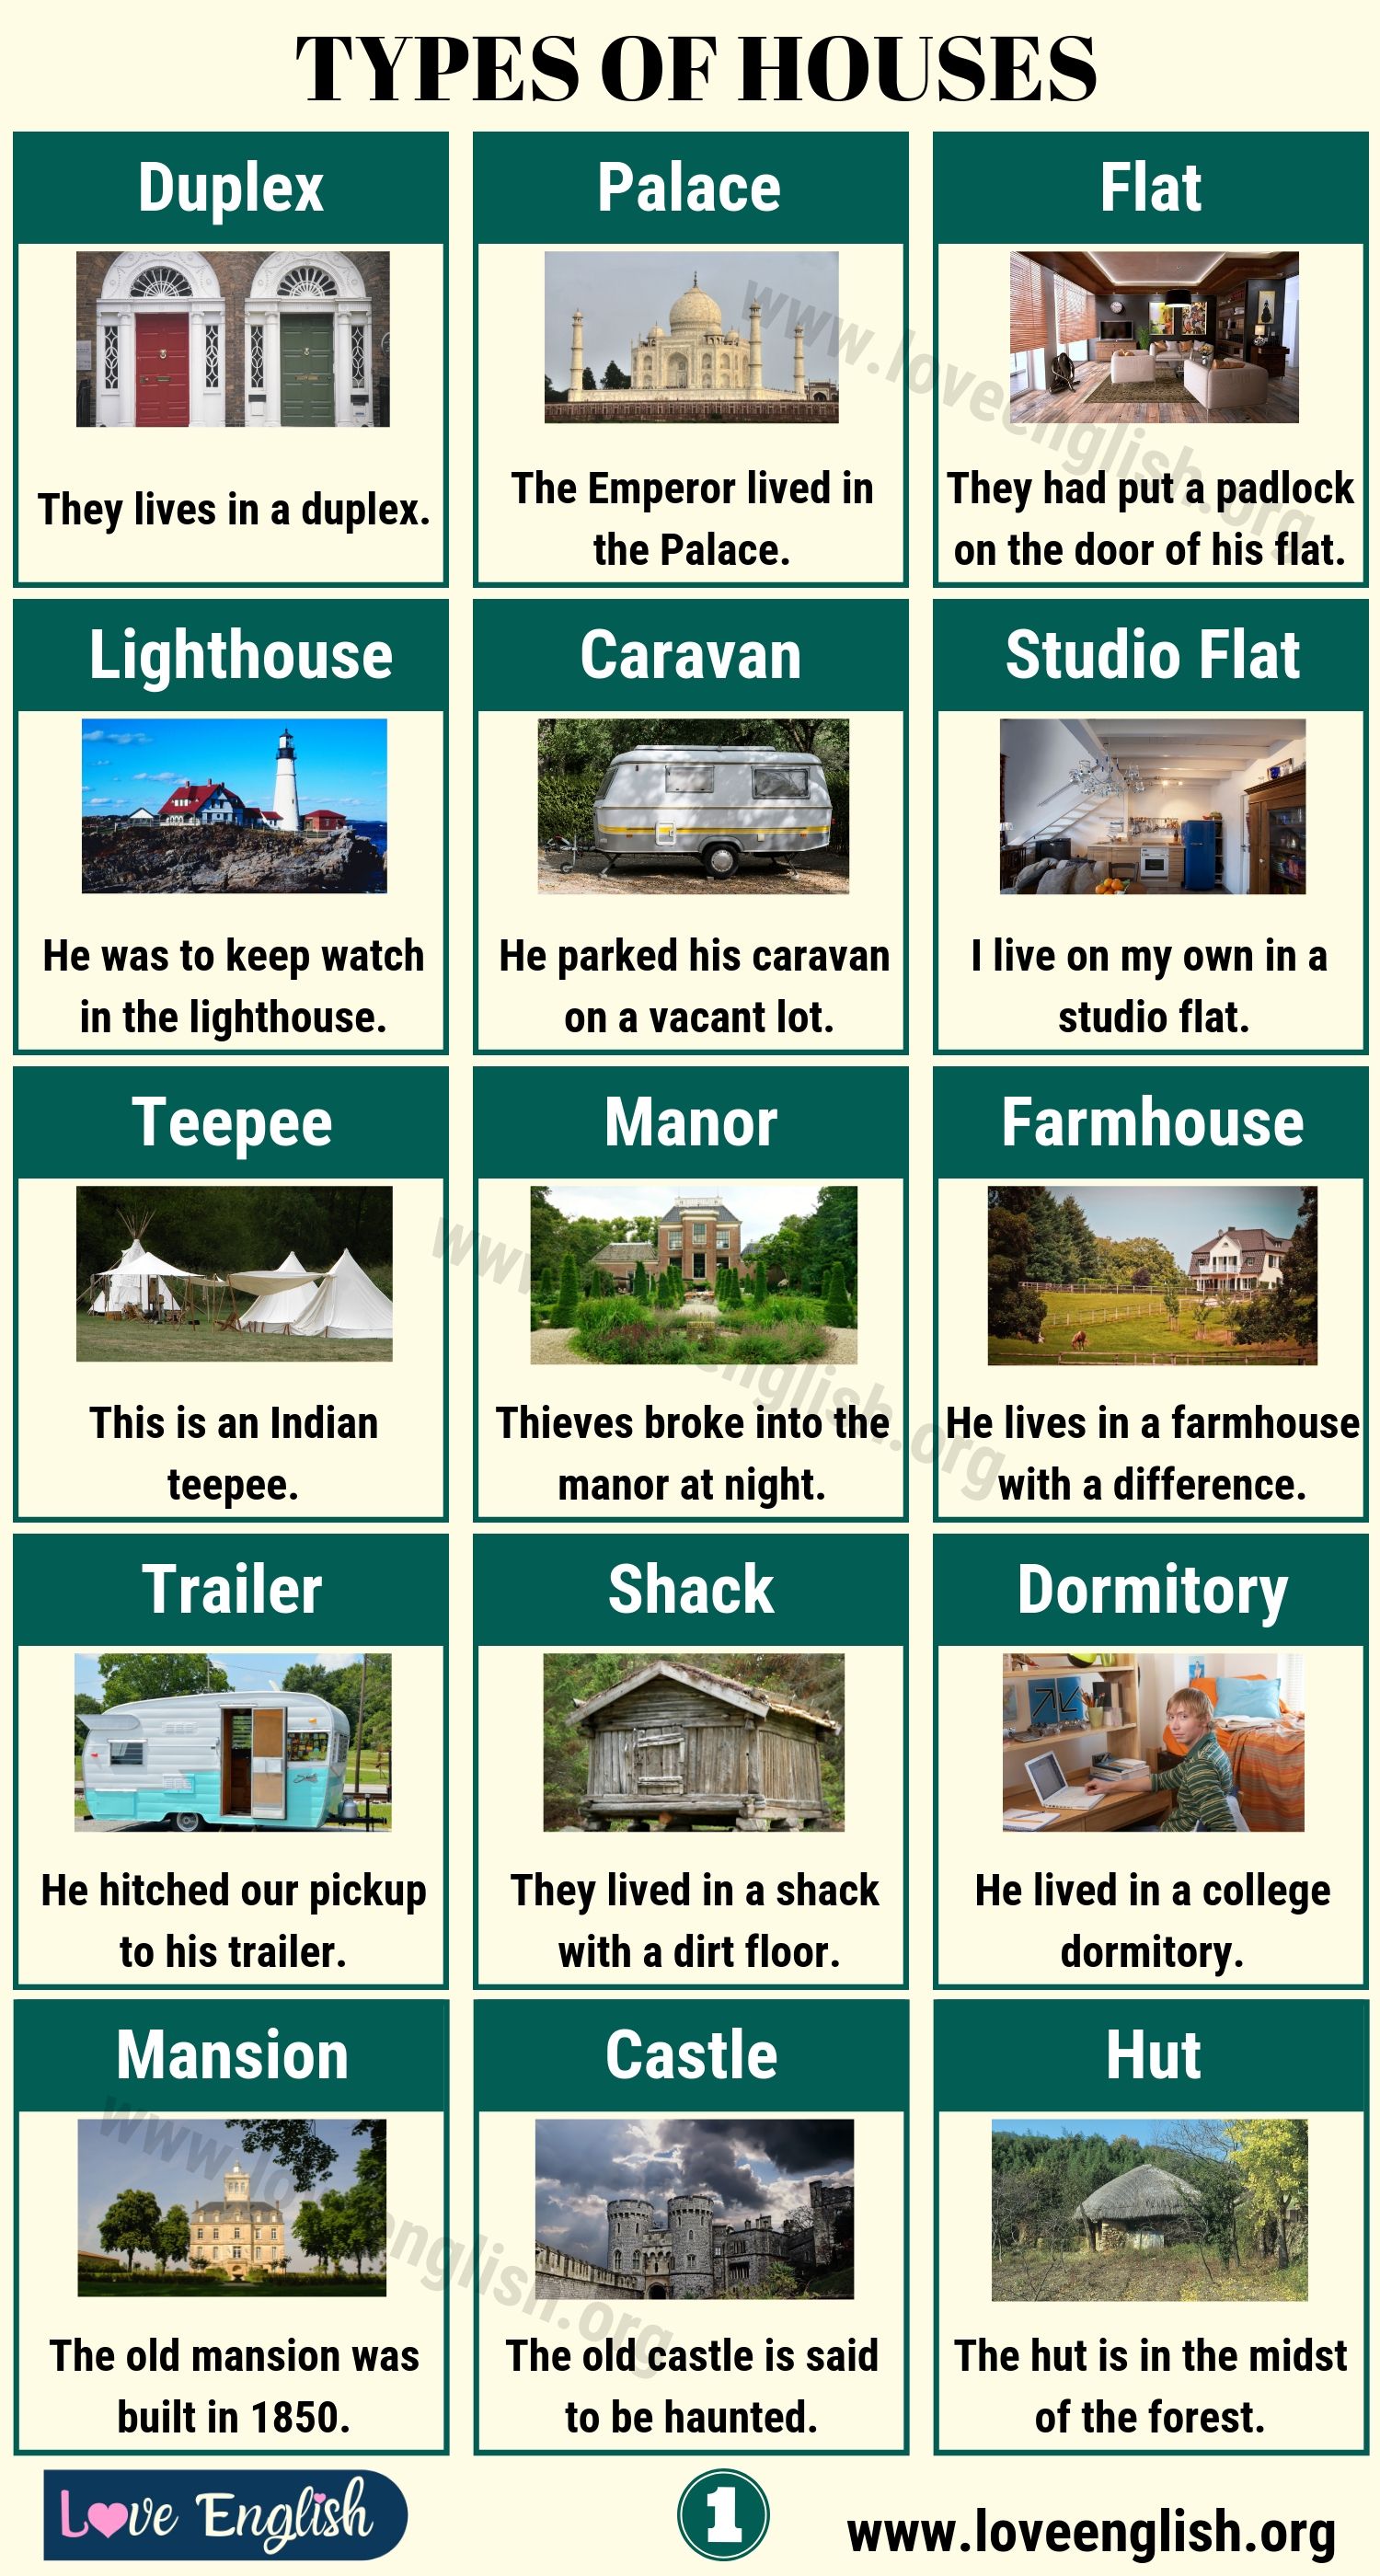 Kinds of housing. Types of the Houses английский язык. Types of Houses список. Type of Houses тема по английскому. Different Types of Houses.